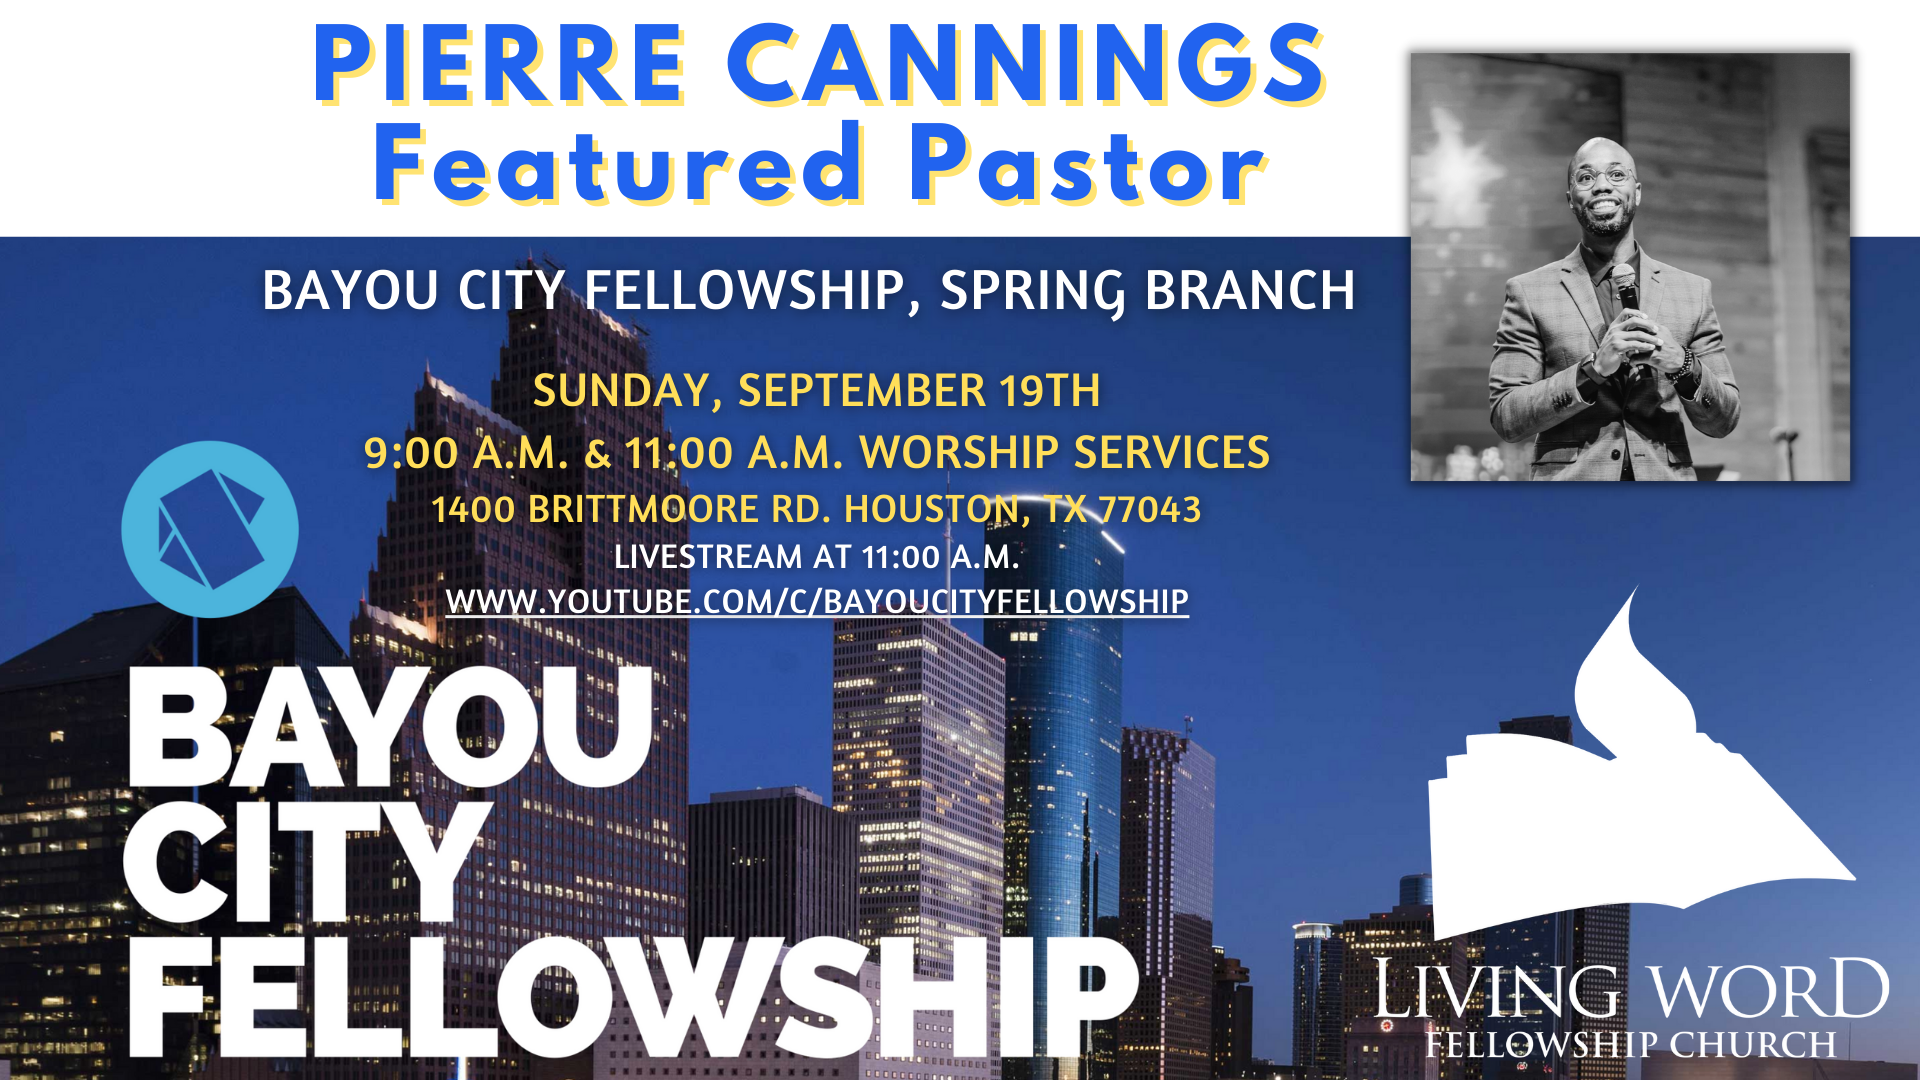 Pierre Cannings – Featured Pastor at Bayou City Fellowship Church, Spring Branch head image